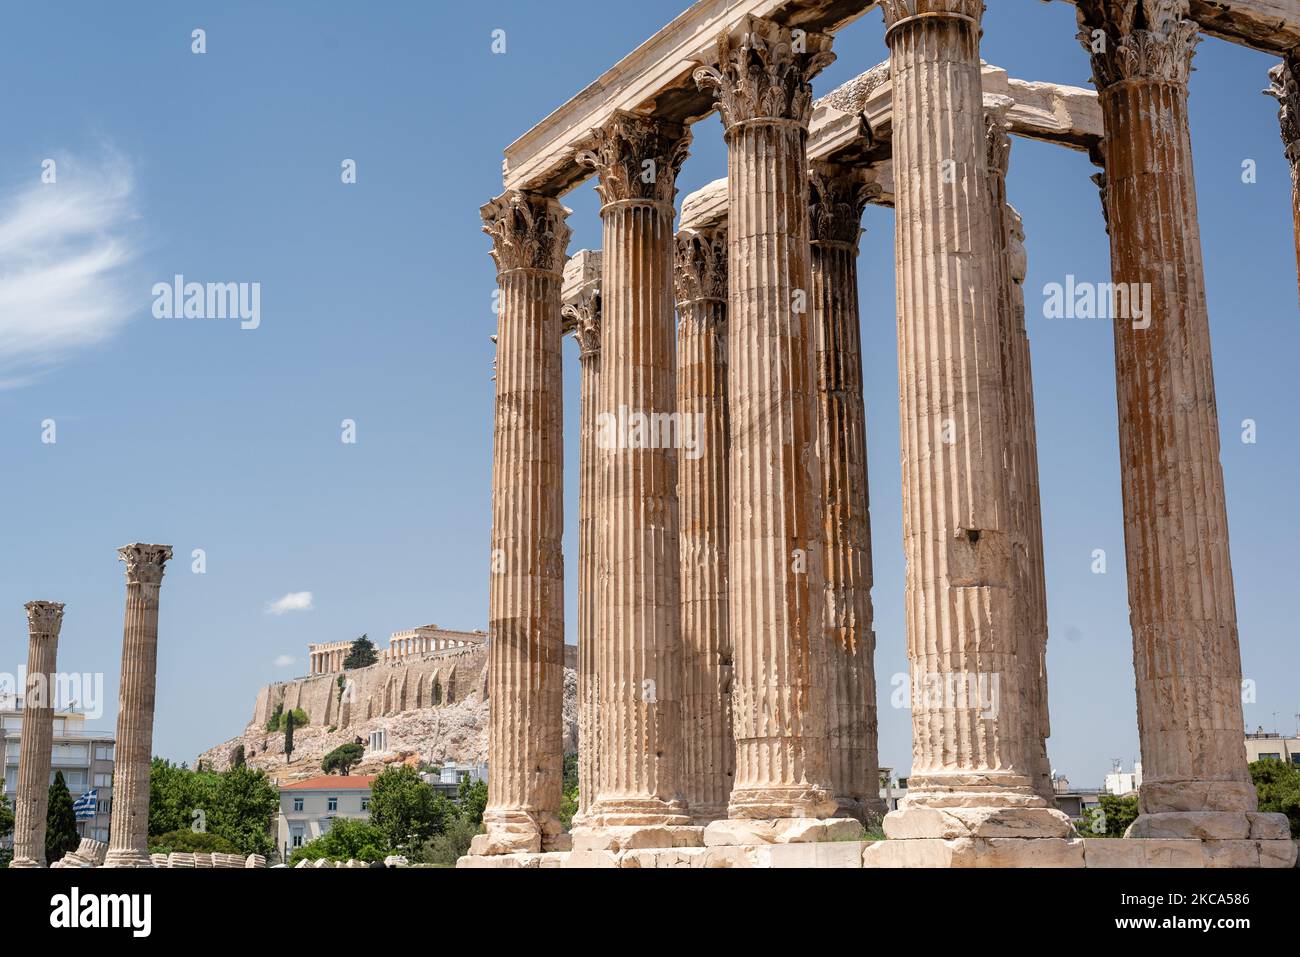 Greece - Temple of Zeus in Athens with the Acropolis in the distance. Stock Photo